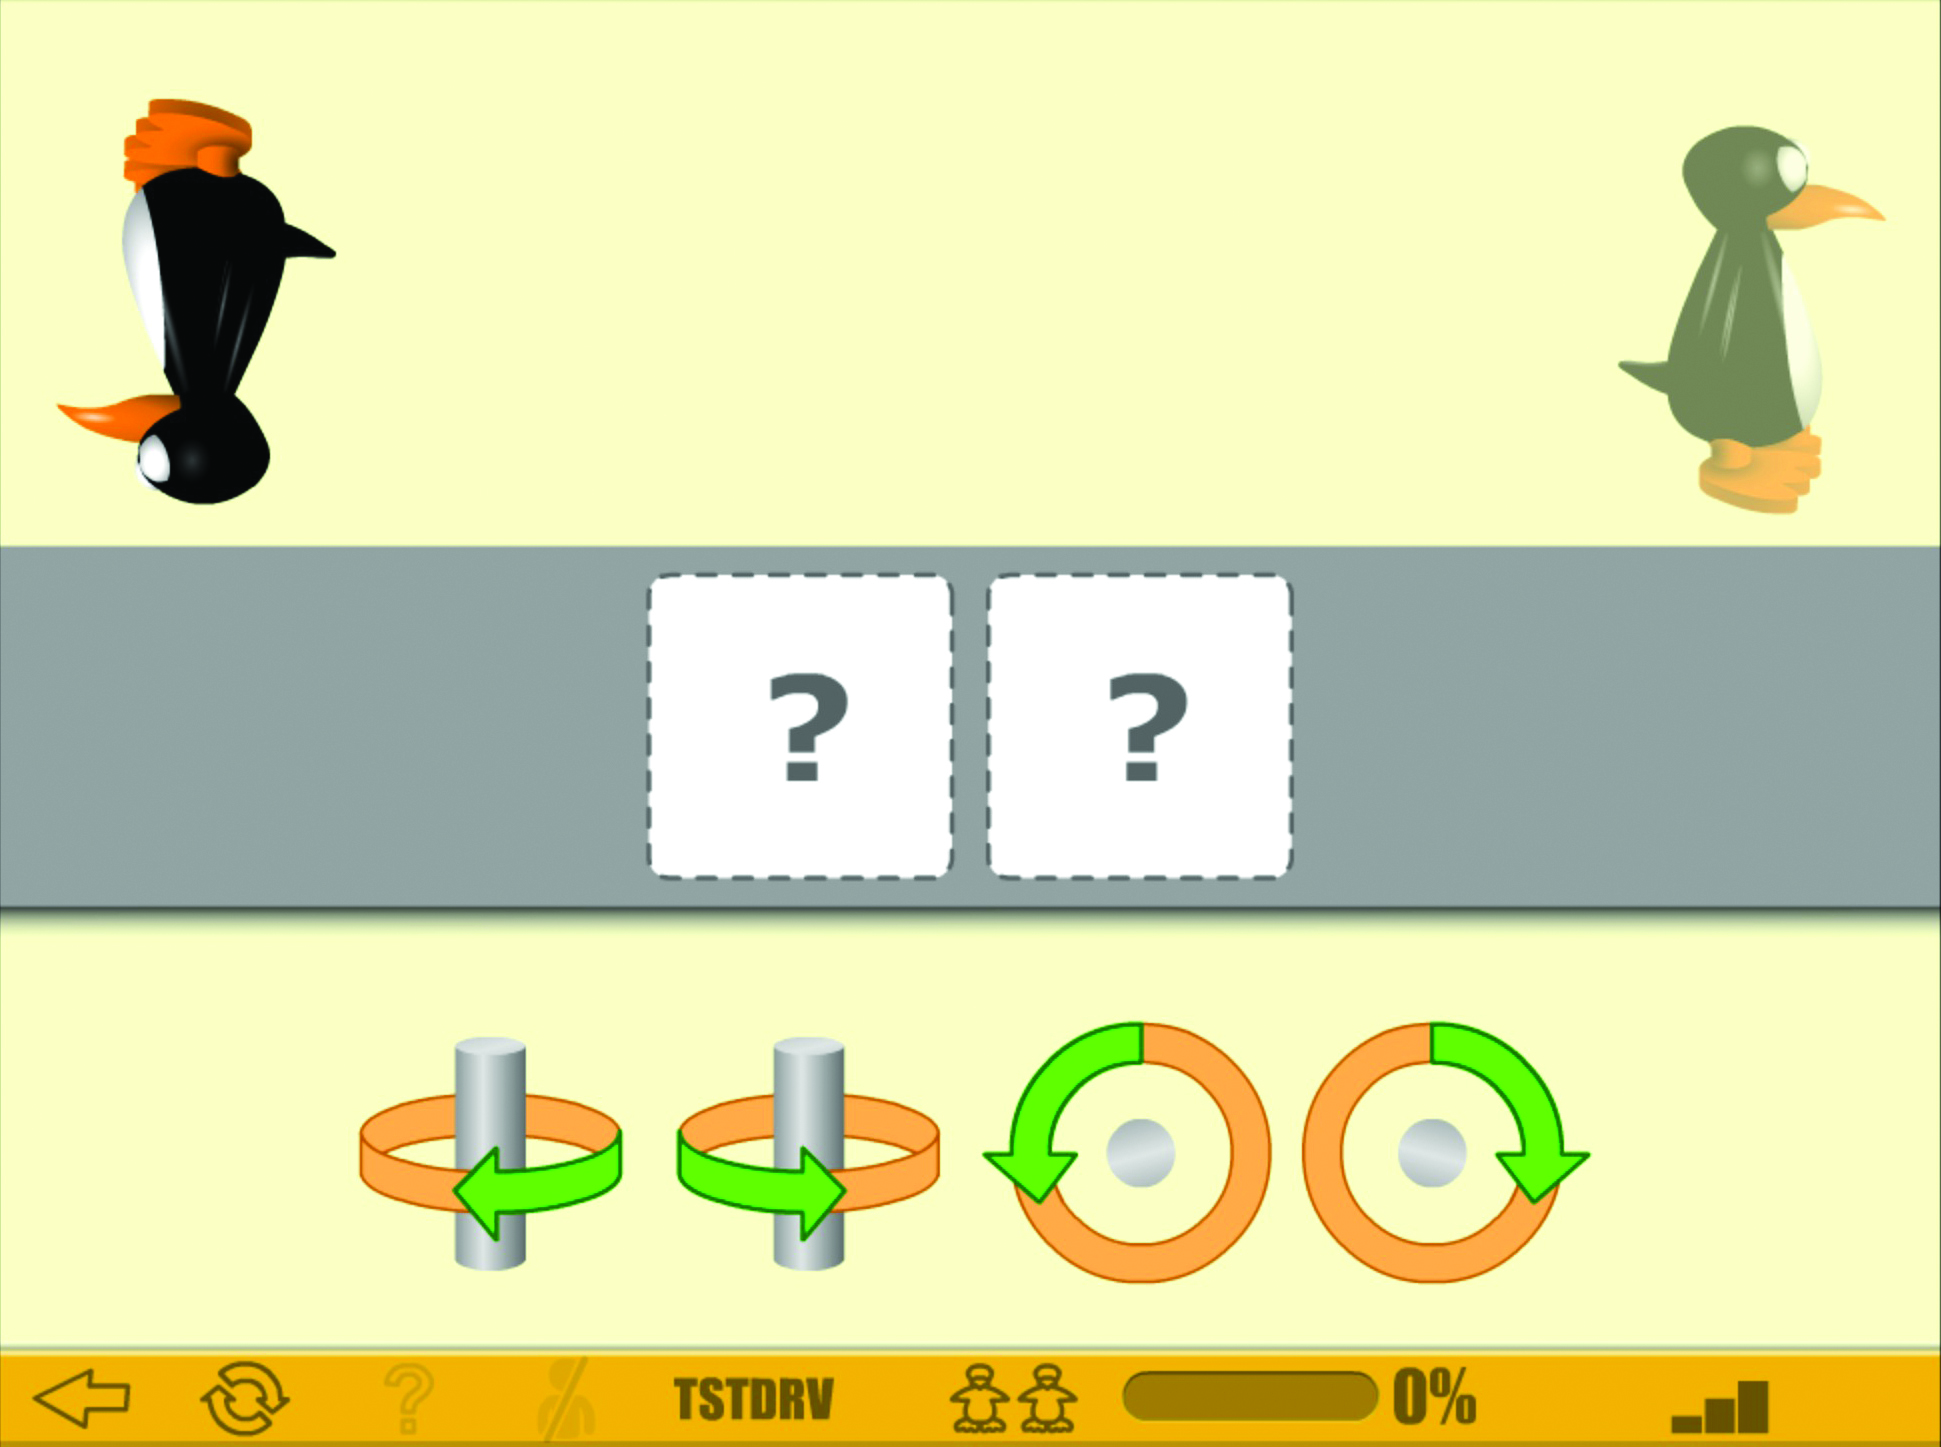 What are some popular JiJi Math games?